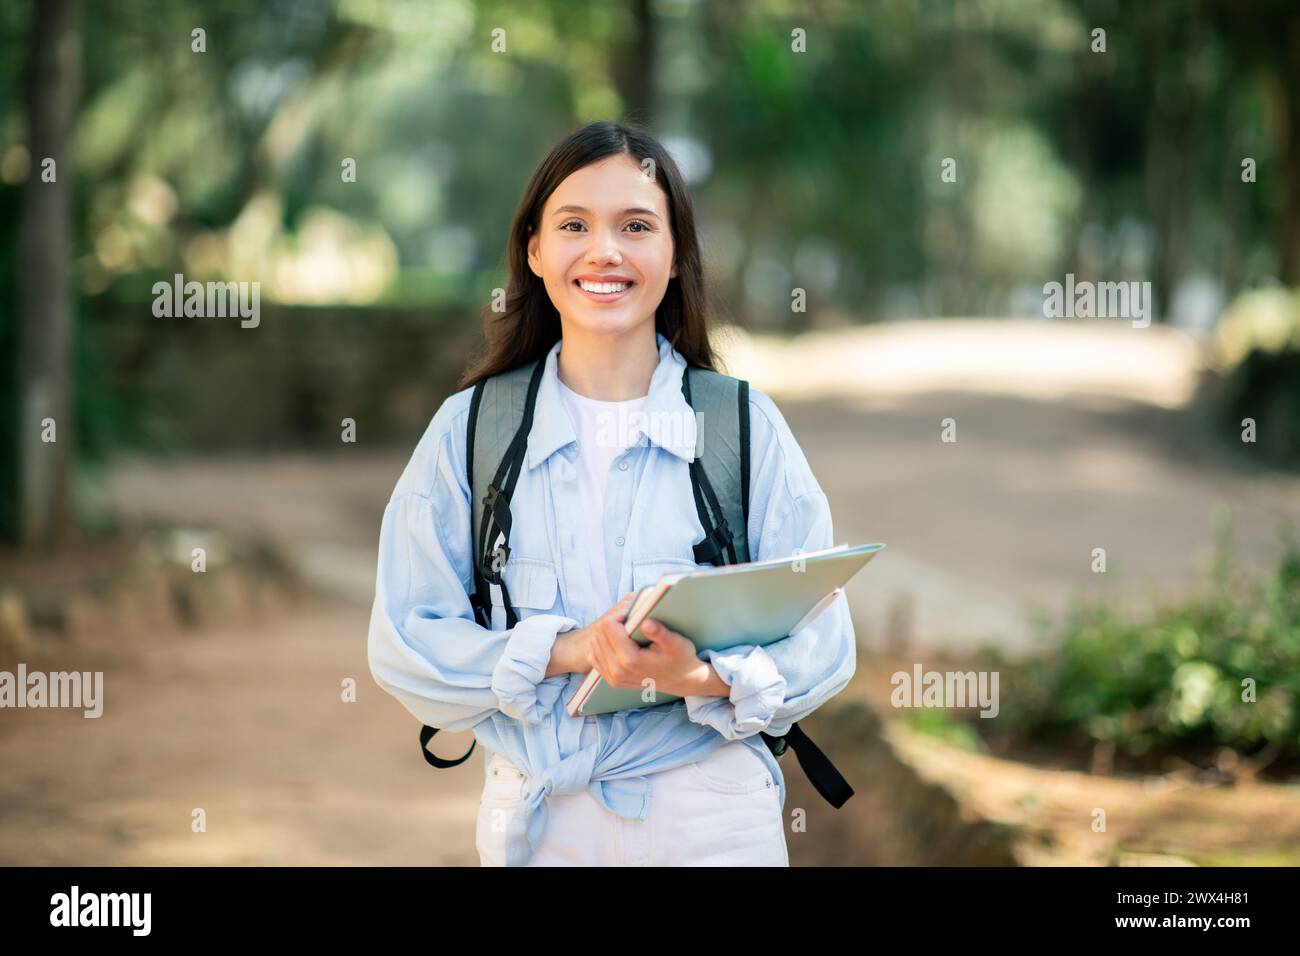 Content young female student with a radiant smile, dressed in white Stock Photo